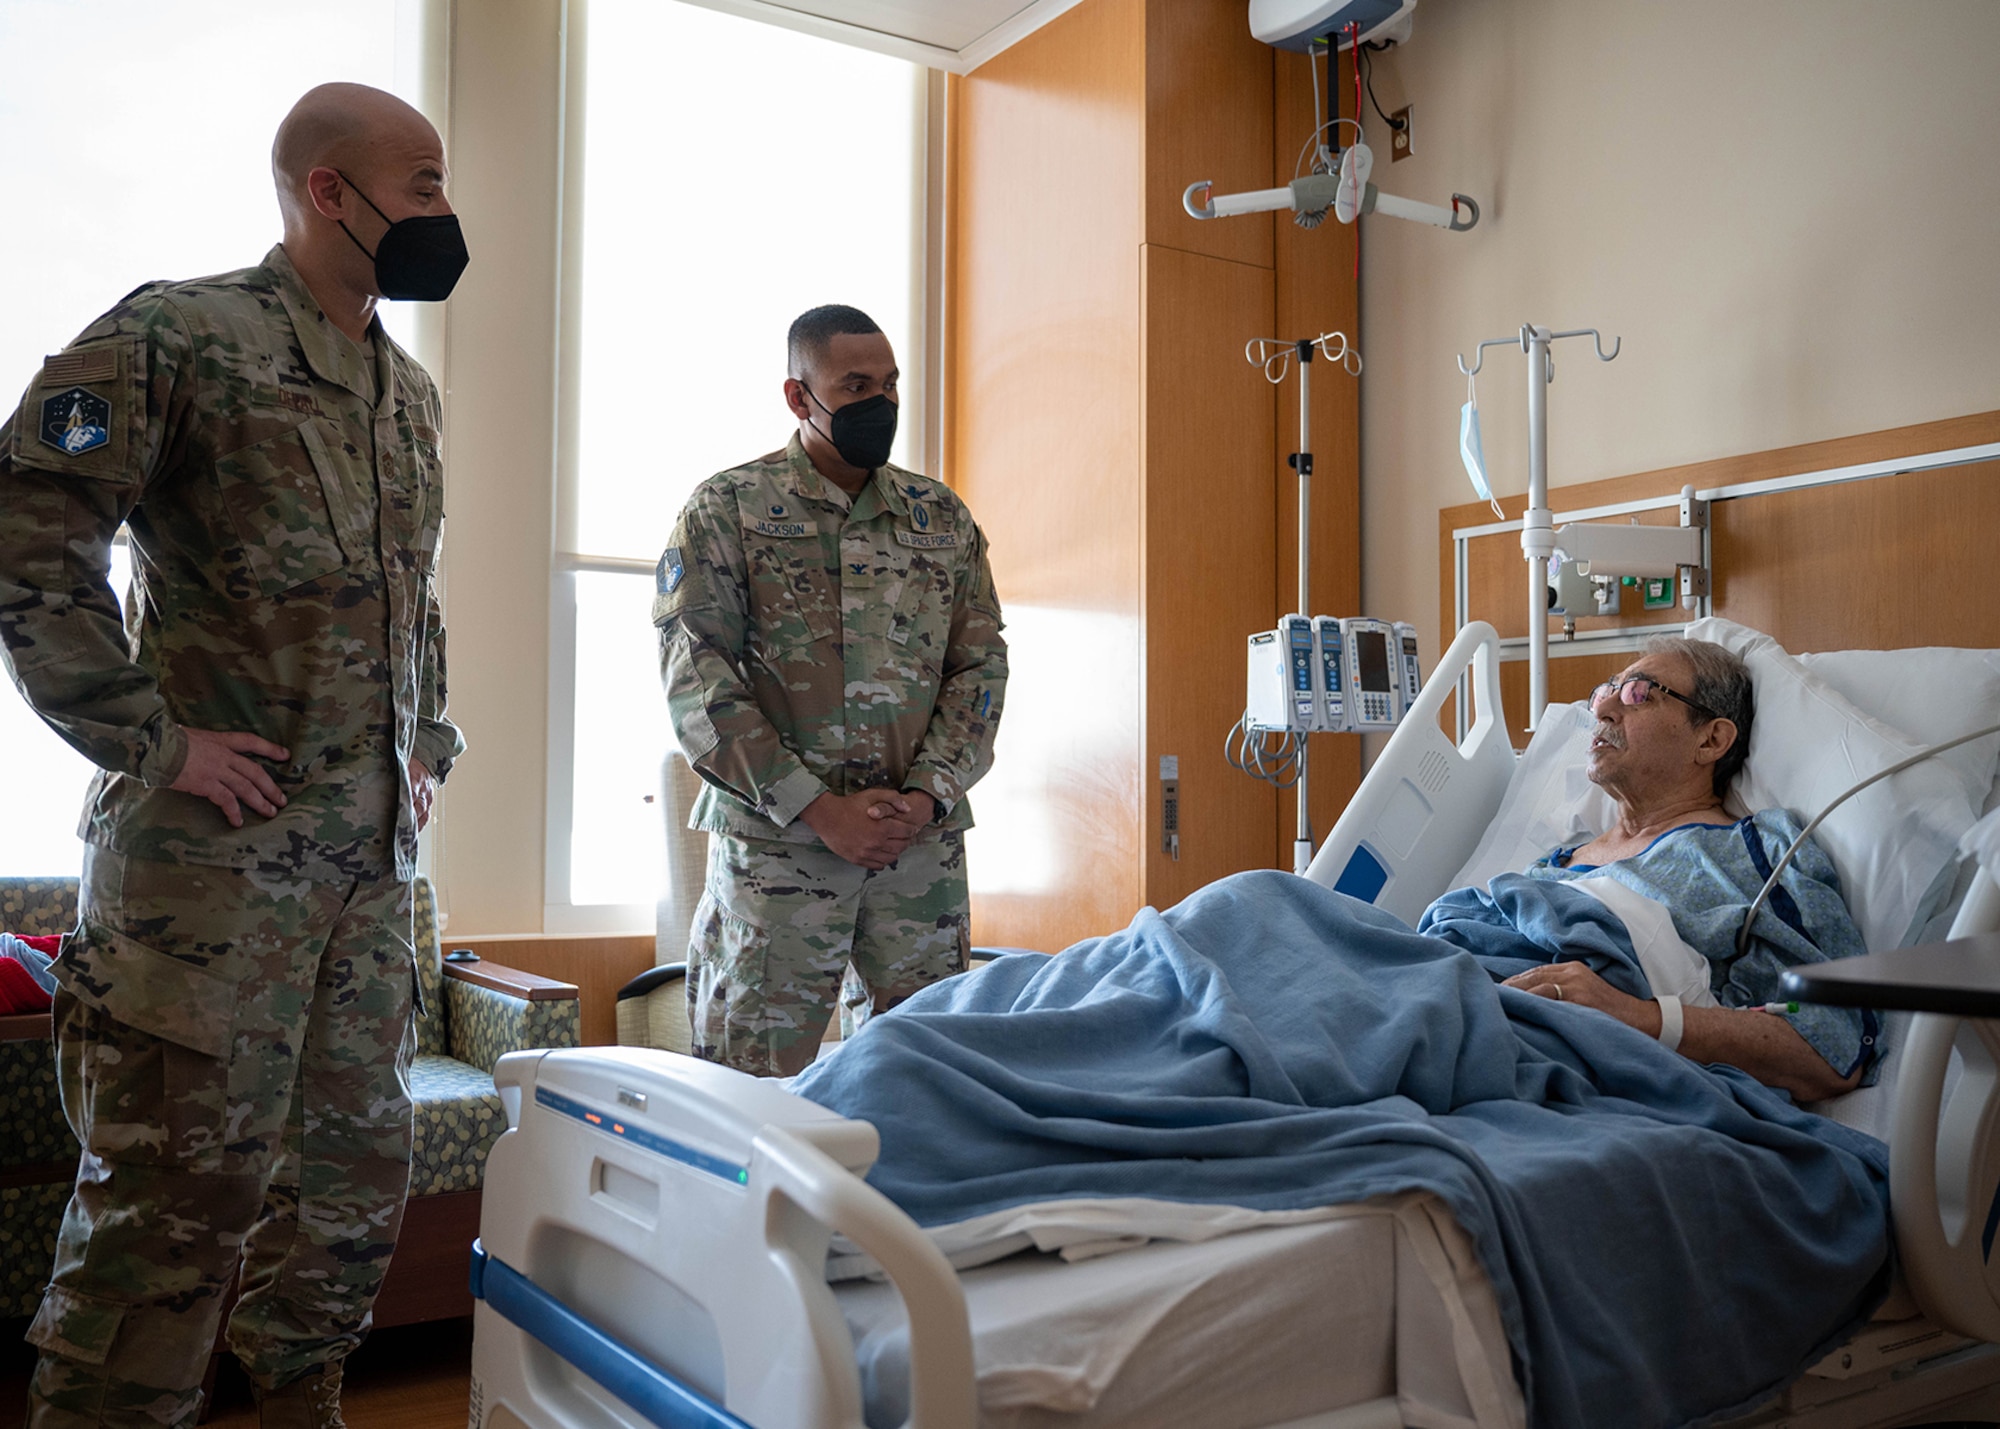 U.S. Space Force Col. Marcus Jackson, Buckley Garrison commander, and U.S. Air Force Chief Master Sgt. Robert Devall, Buckley Garrison command chief, visit a veteran at the Rocky Mountain Regional VA Medical Center in Aurora, Colo., Feb. 15, 2022. The National Salute to Veteran Patients occurs the week of Feb. 14 and pays tribute to just under 100,000 patients a day that receive medical treatment in VA medical facilities. (U.S. Space Force photo by Senior Airman Haley N. Blevins)